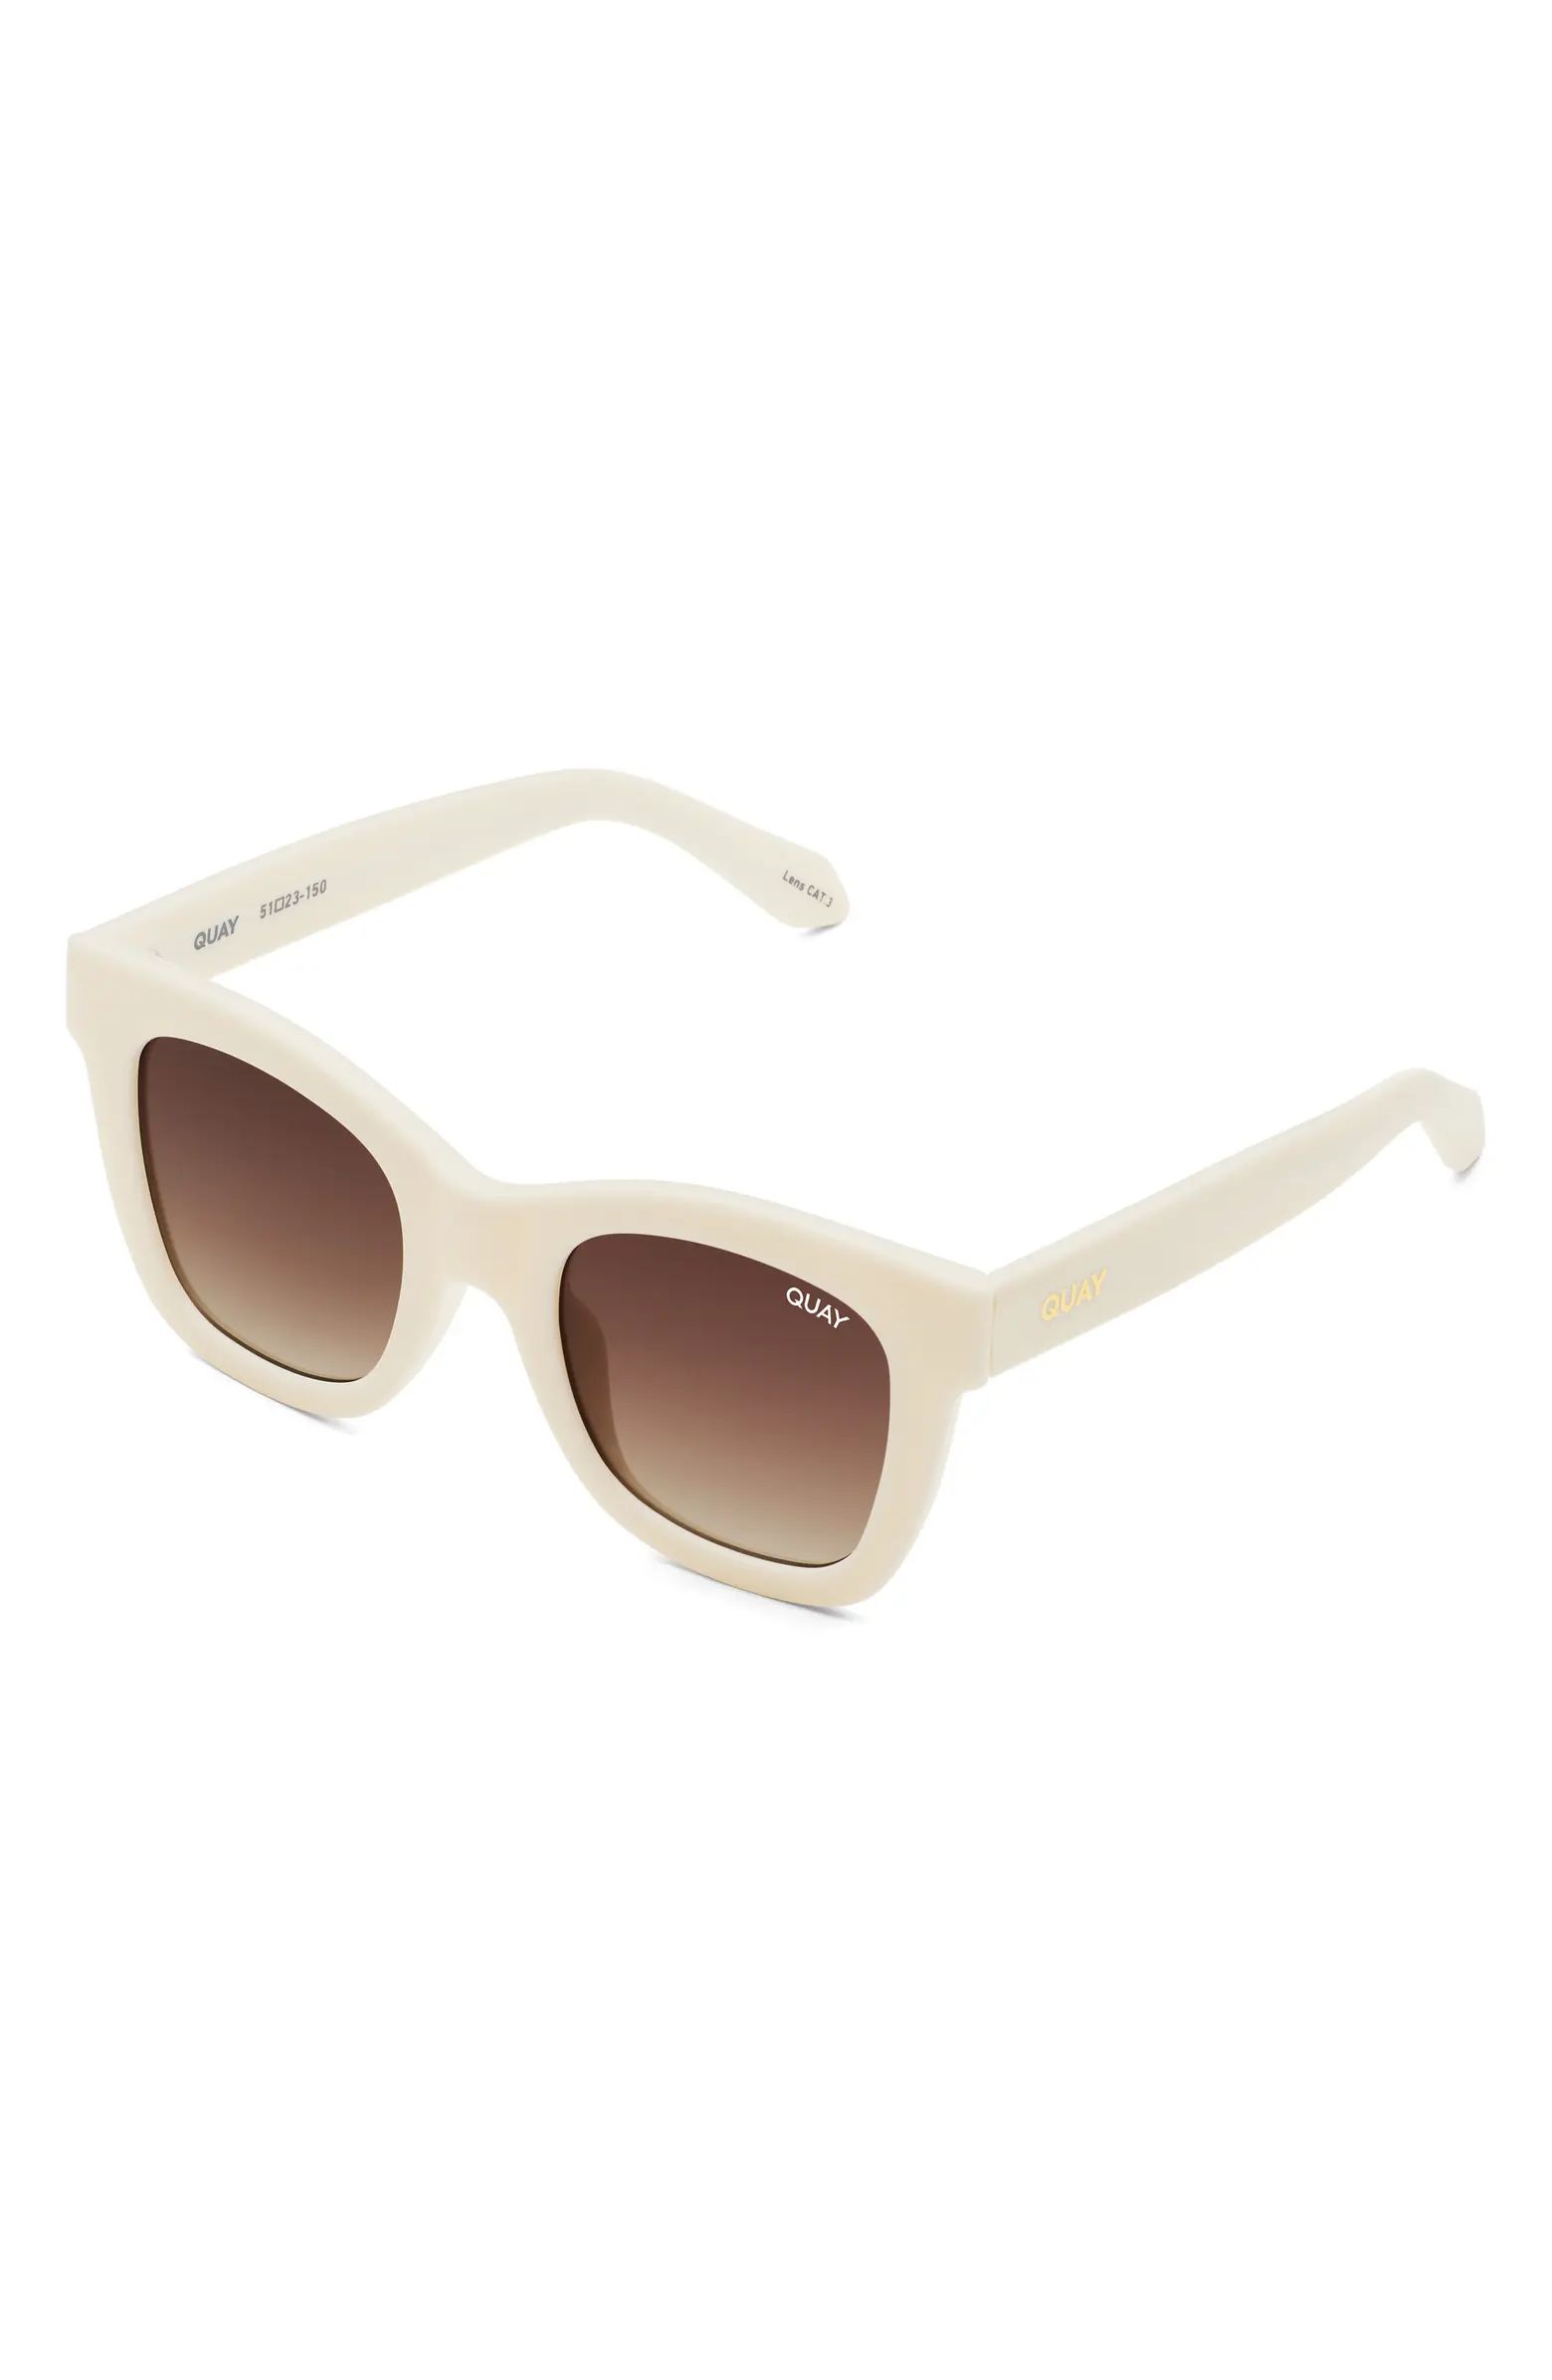 After Hours 48mm Square Sunglasses | Nordstrom